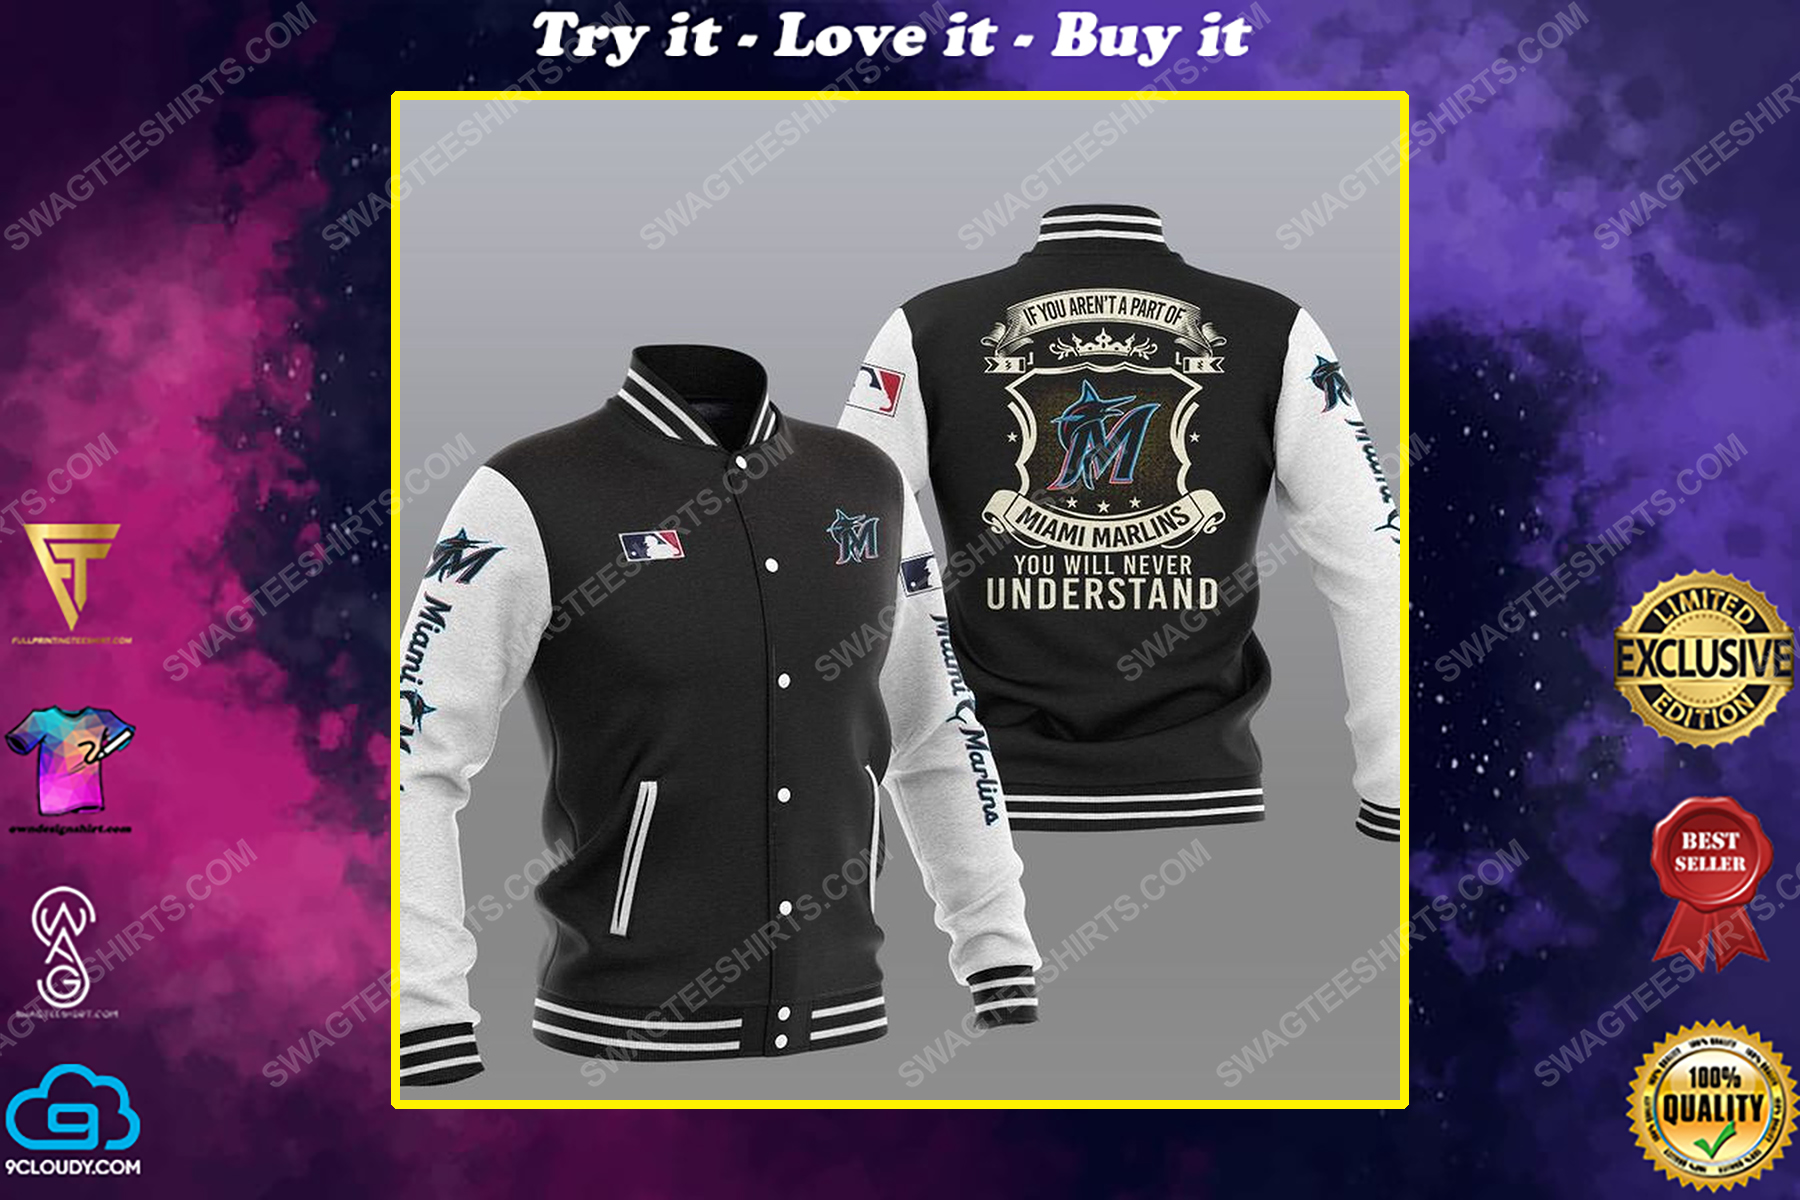 You will never understand miami marlins all over print baseball jacket